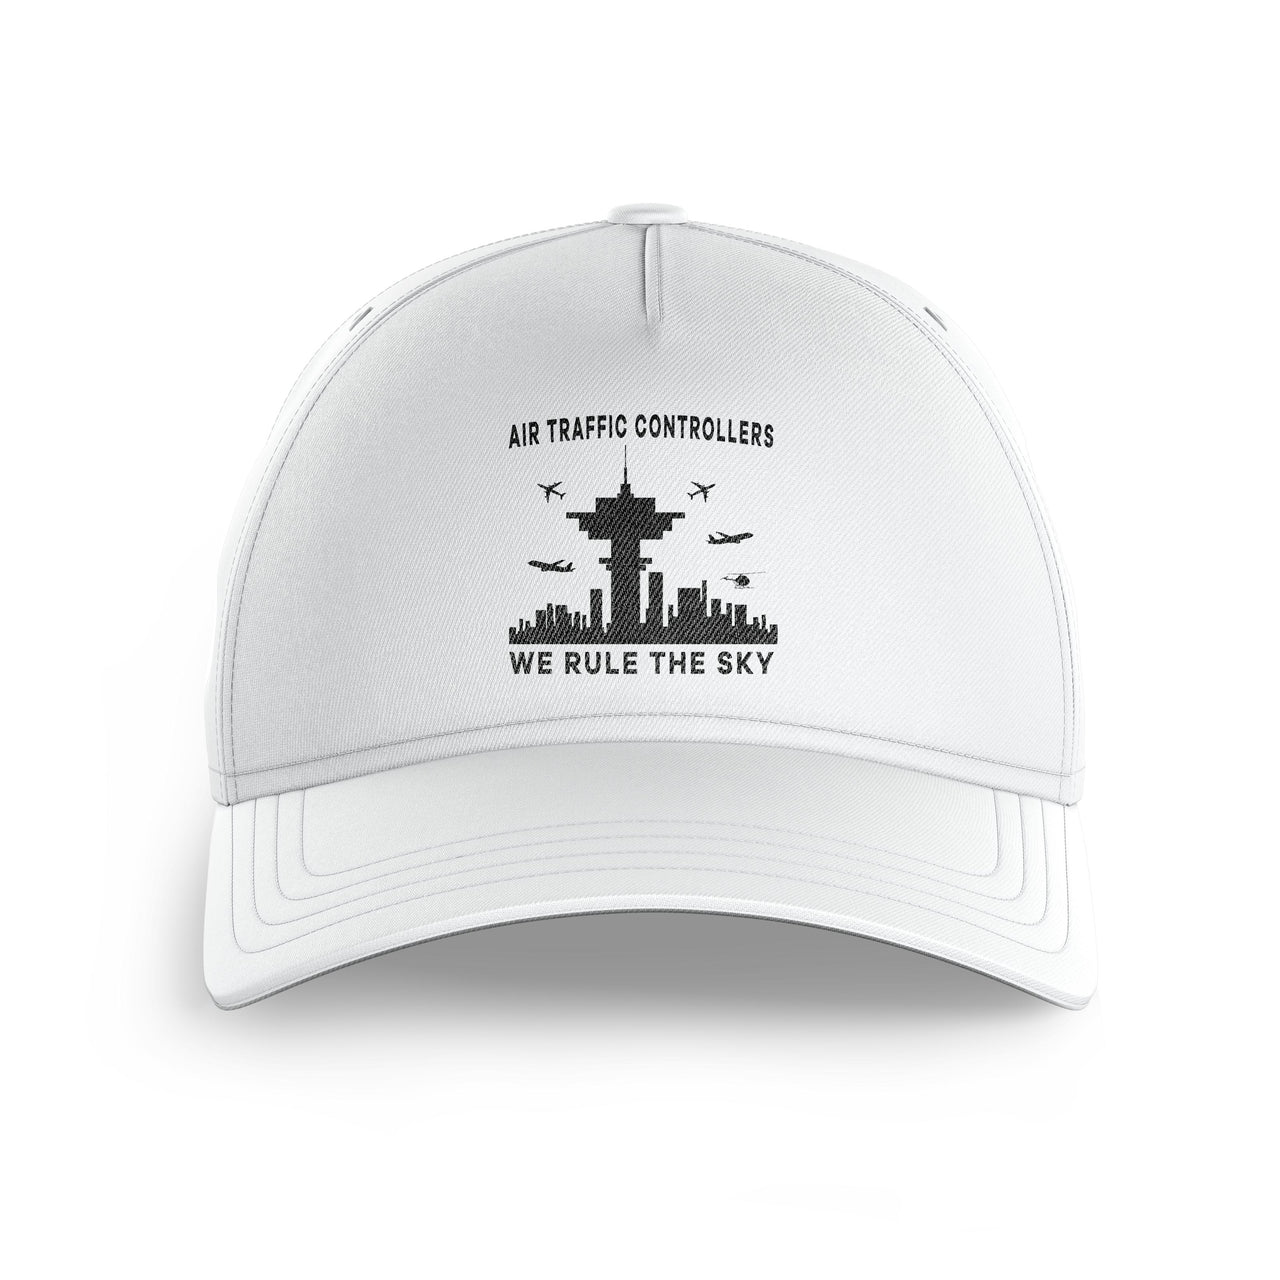 Air Traffic Controllers - We Rule The Sky Printed Hats